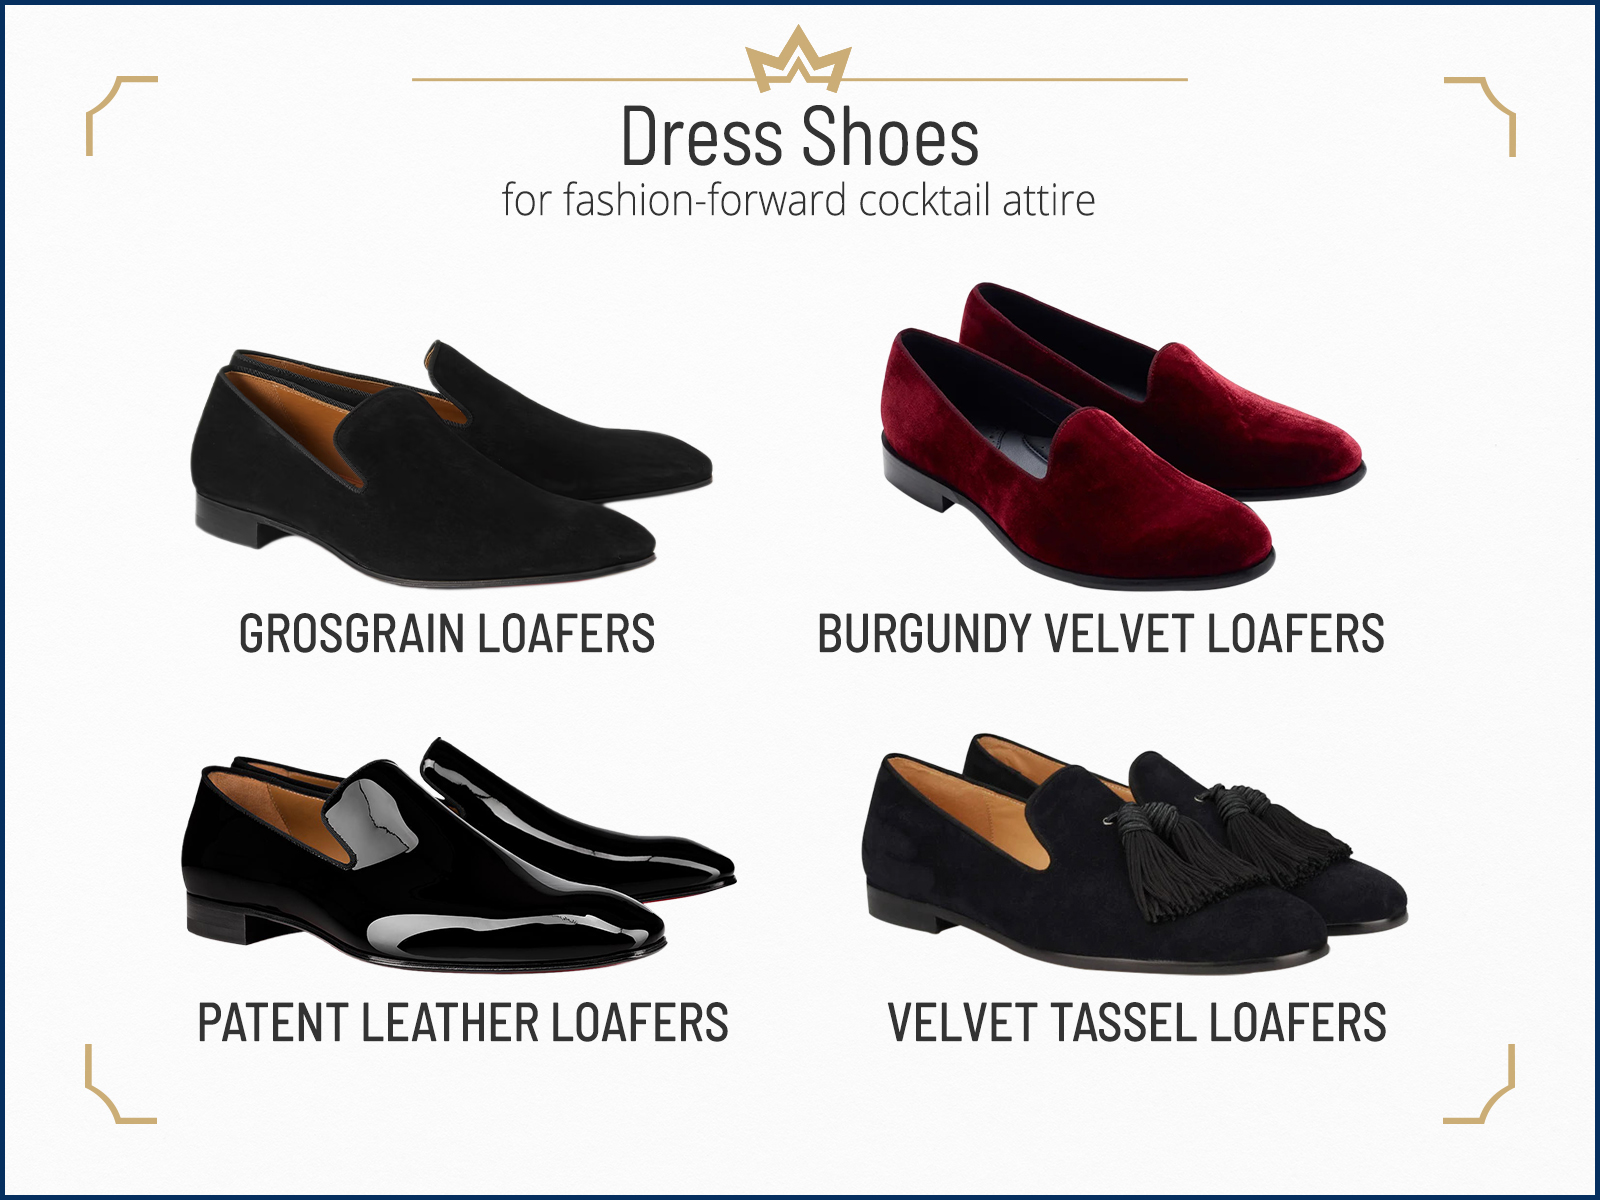 Recommended dress shoes for fashion-forward outfits